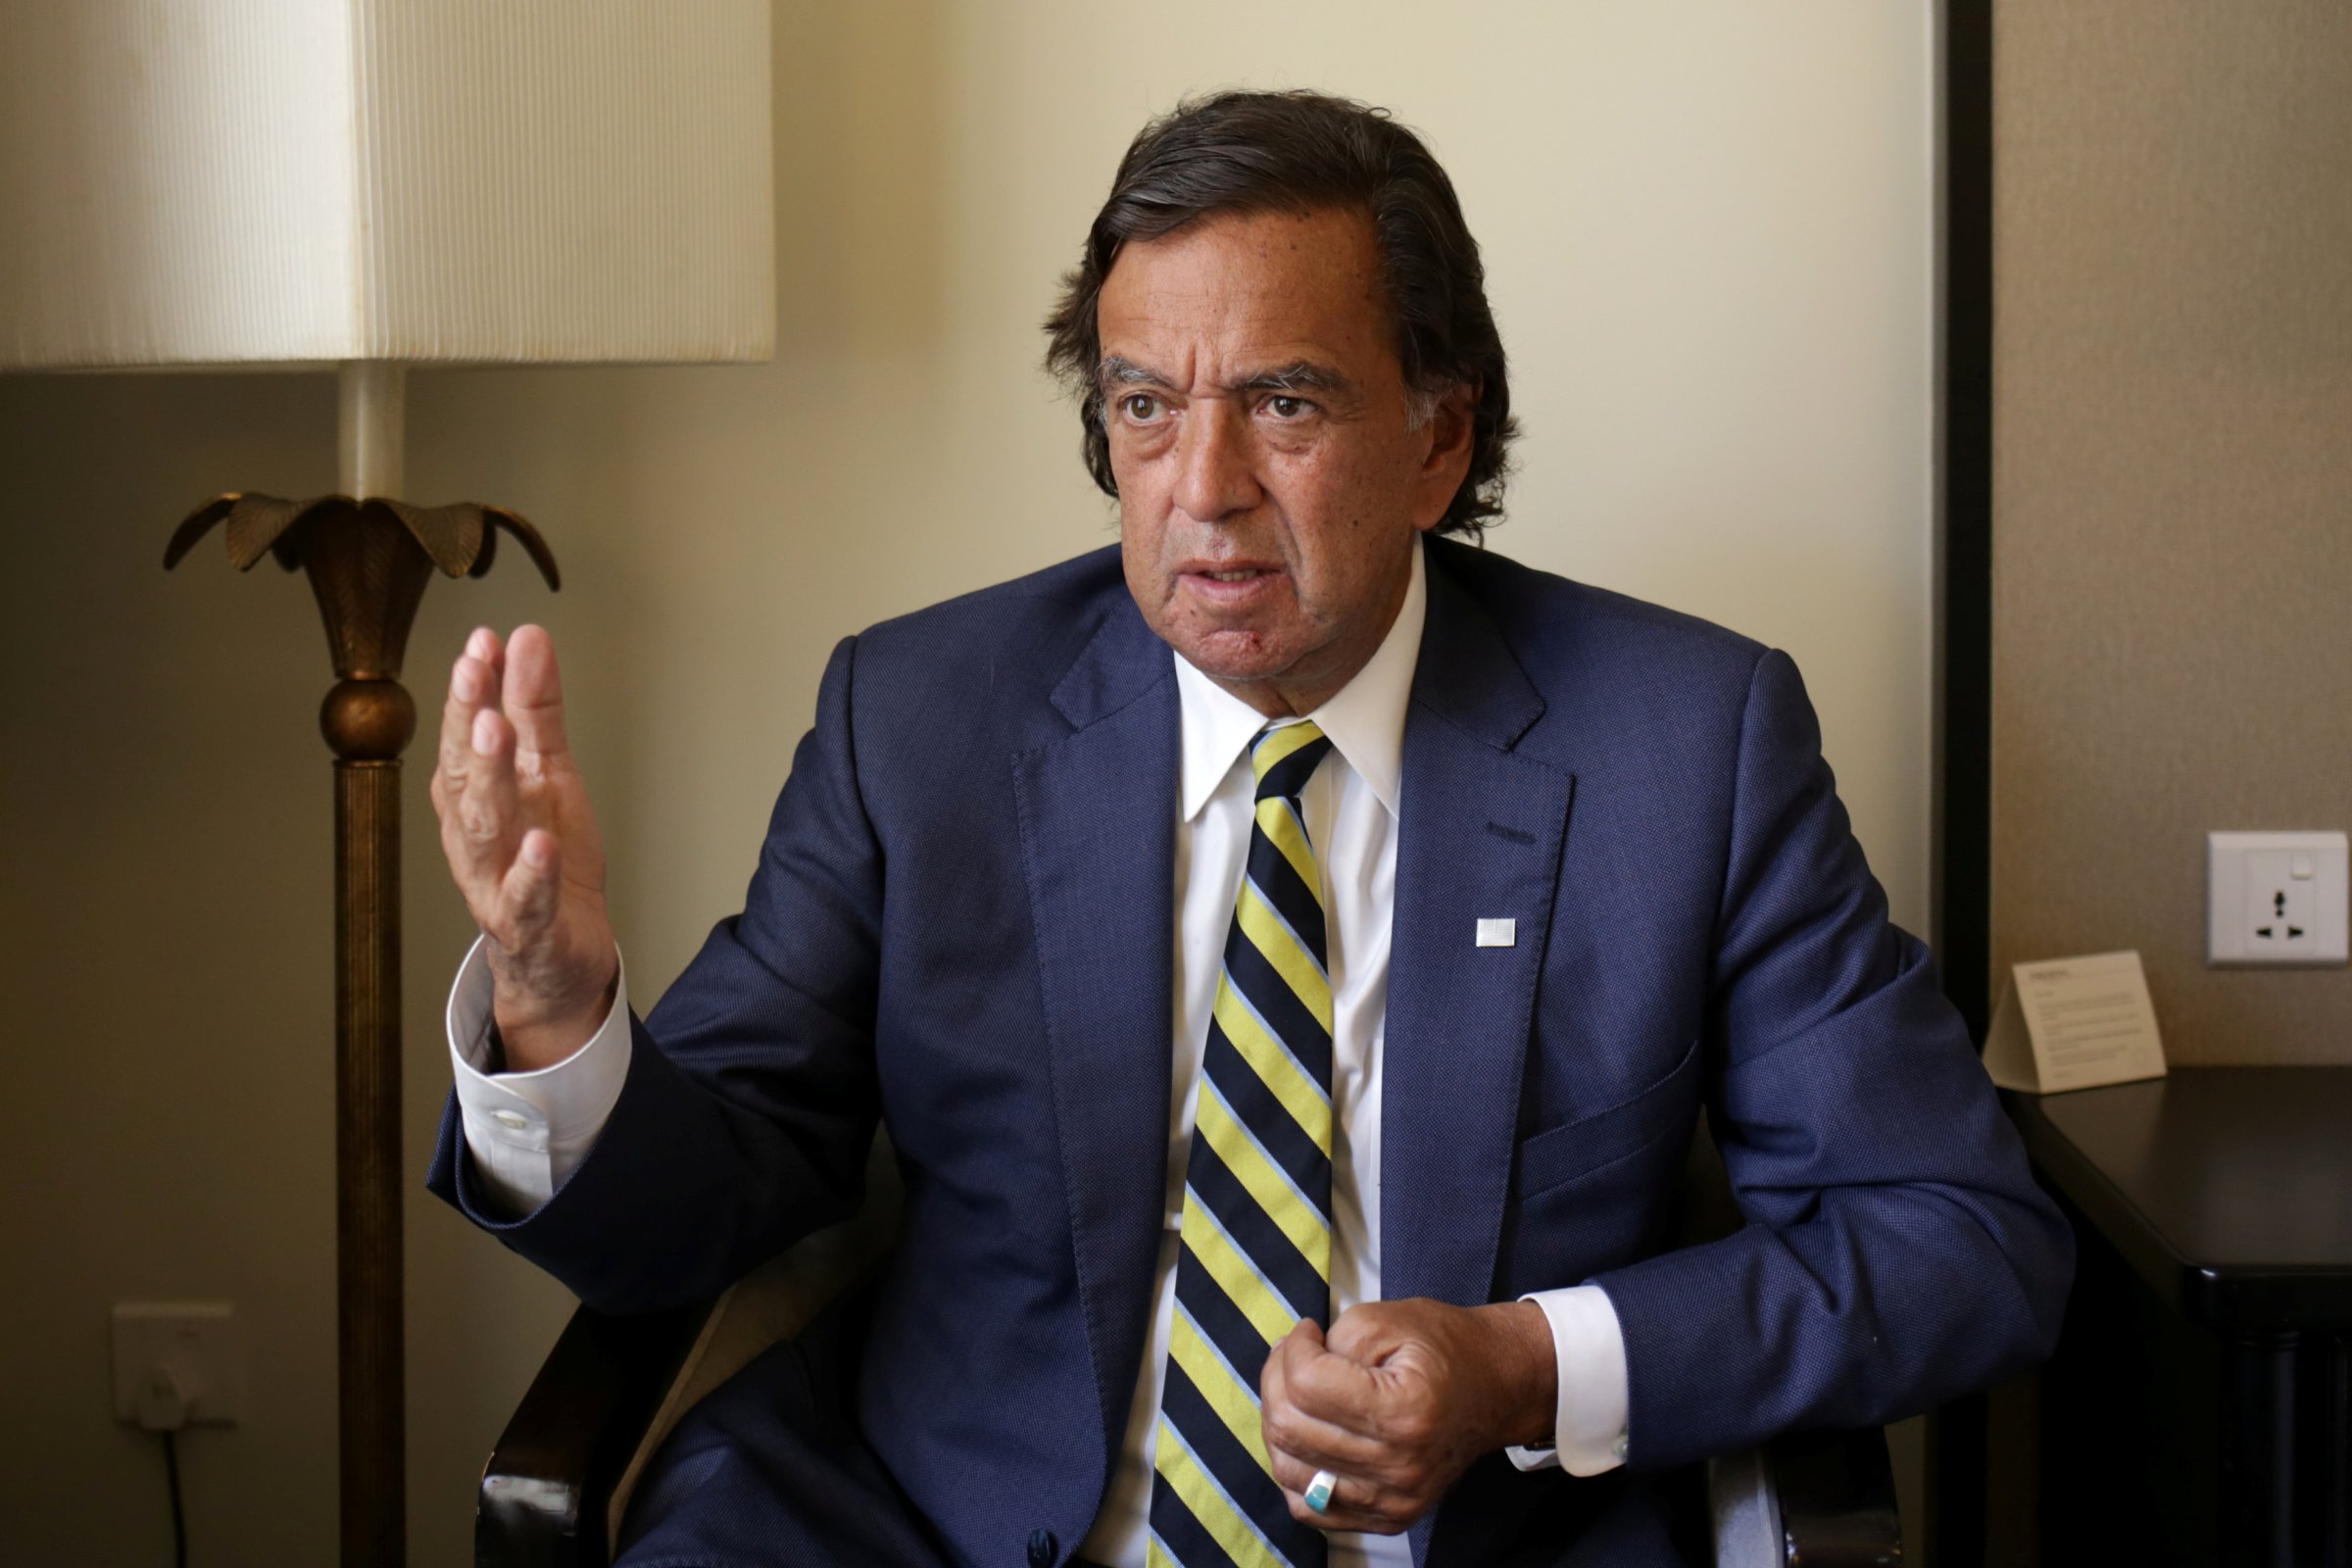 Former New Mexico governor Bill Richardson speaks during an interview with Reuters as a member of an international advisory board on the crisis of Rakhine state in Yangon